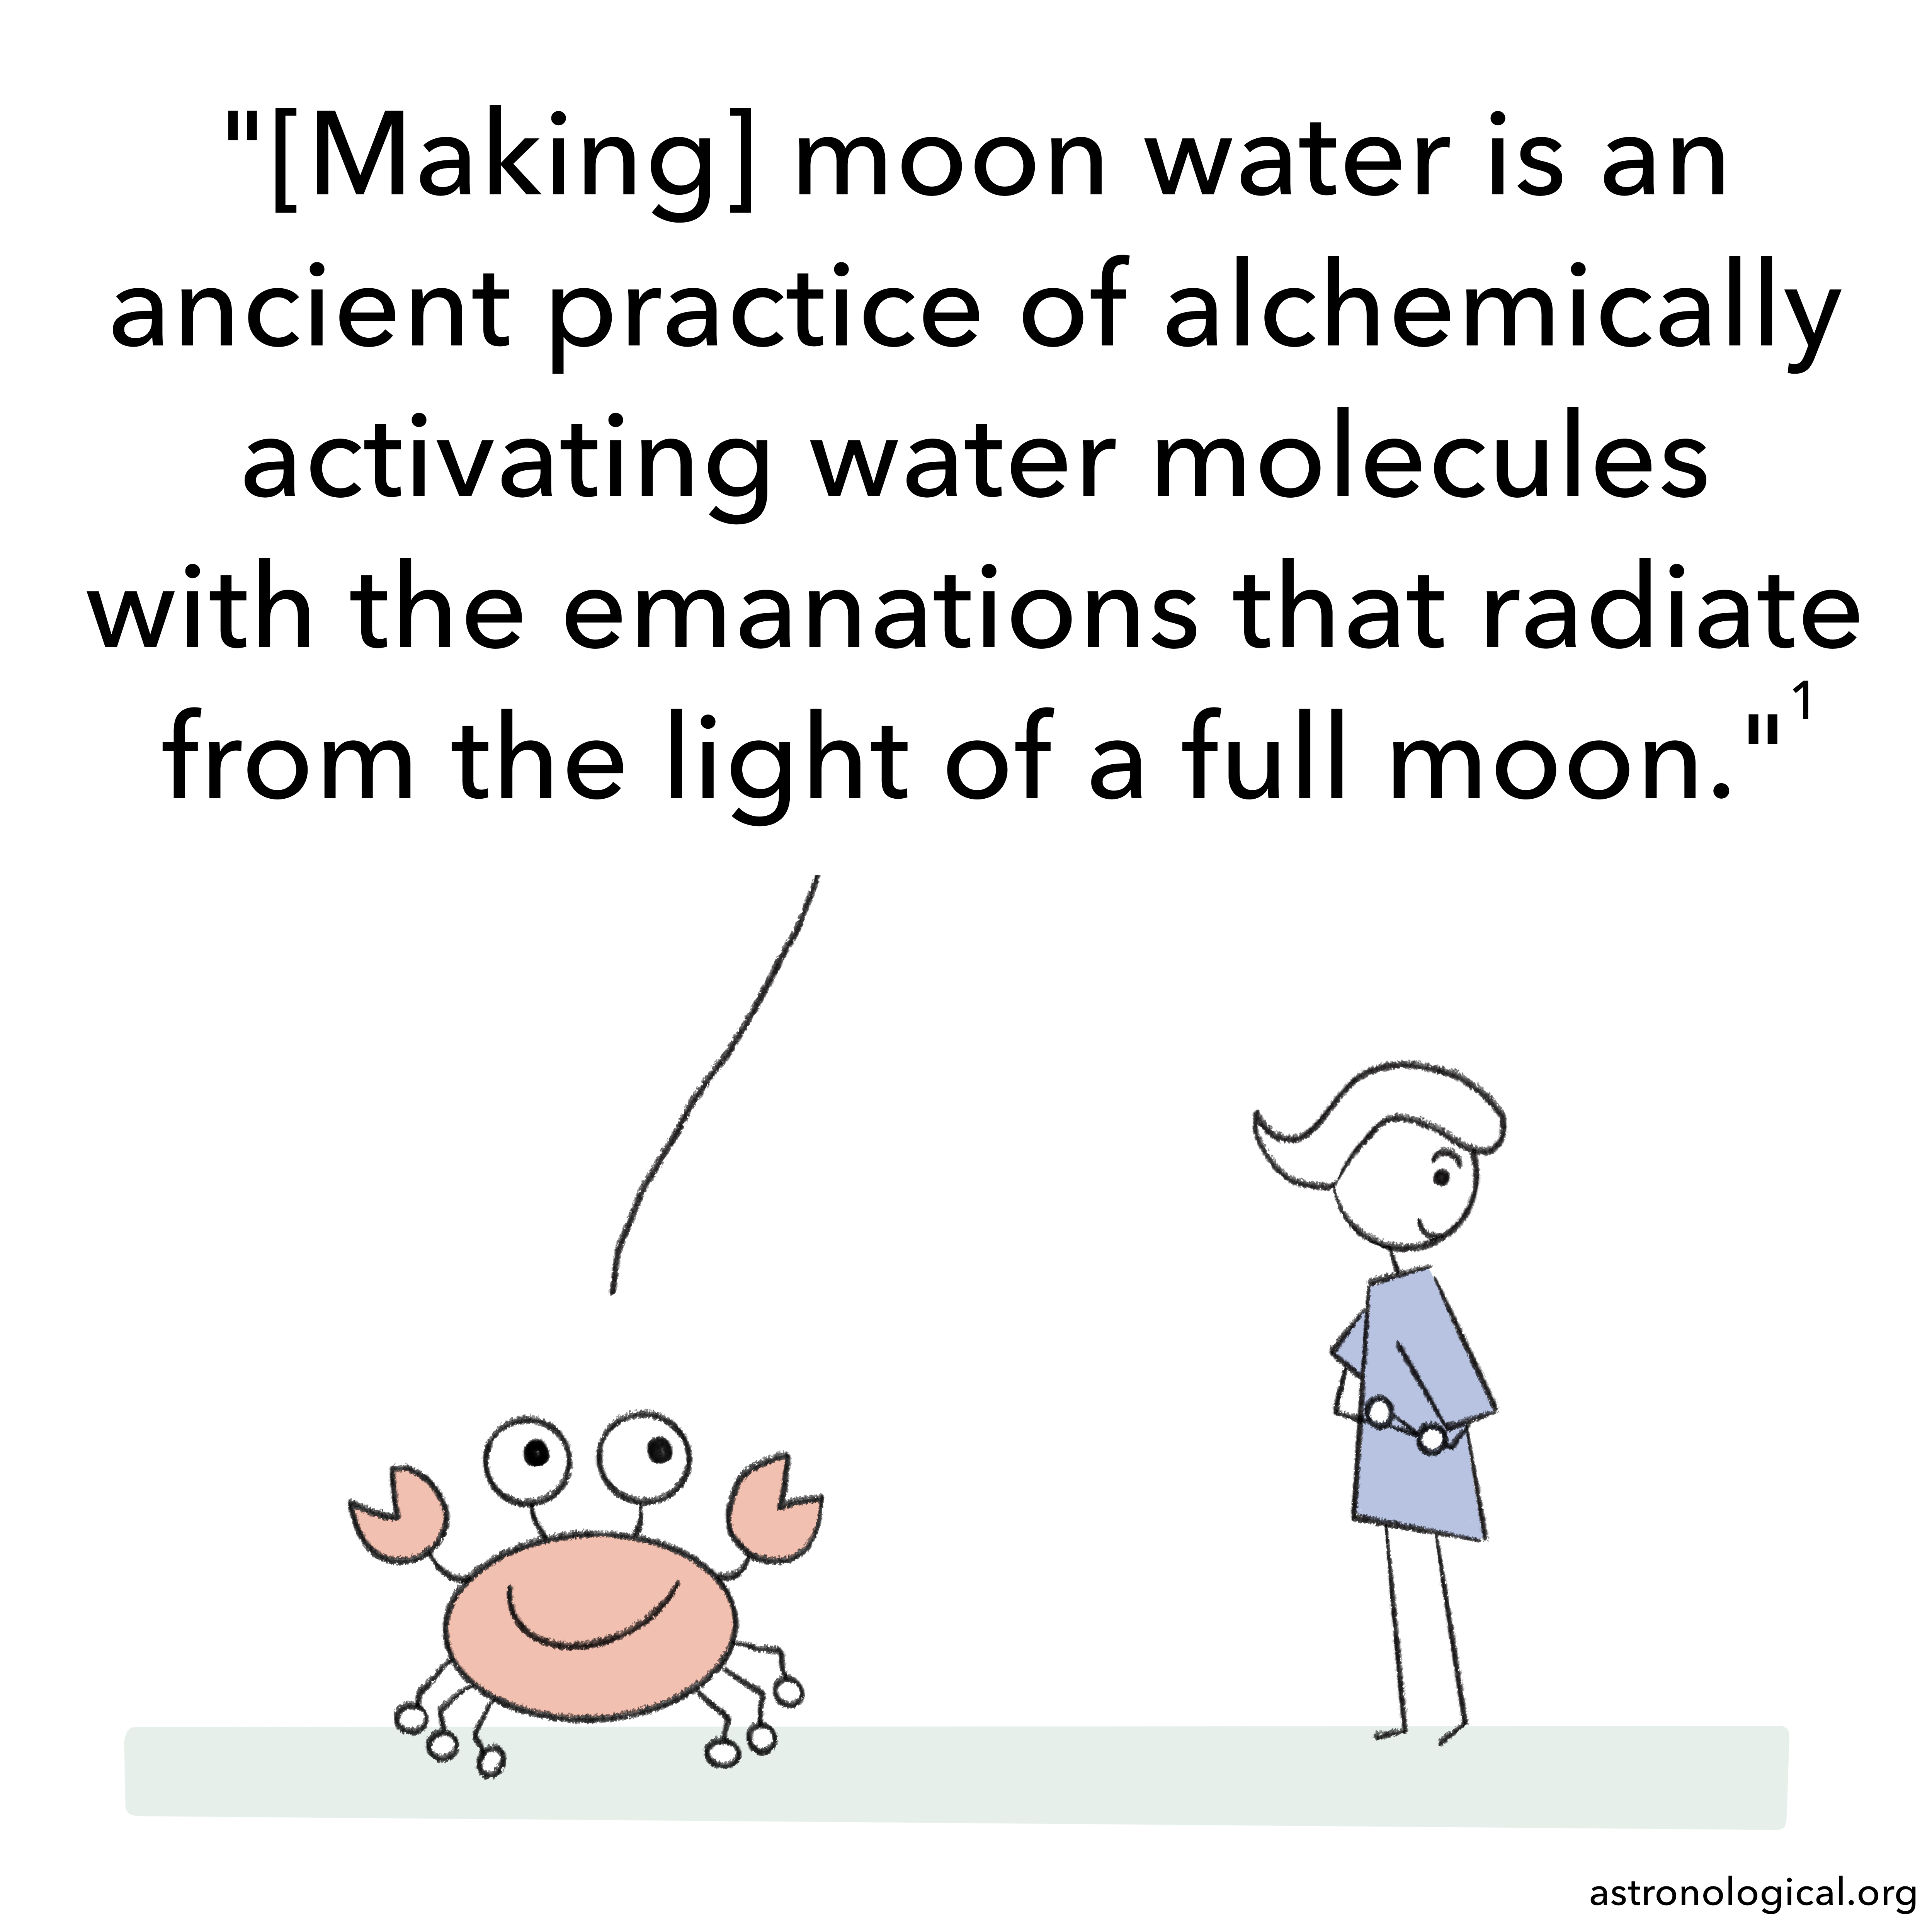 The crab continues: Making moon water is an ancient practice of alchemically activating water molecules with the emanations that radiate from the light of a full moon. The girl’s eyebrows are still up. She has turned her head to hide her face from the crab and is smiling a little.